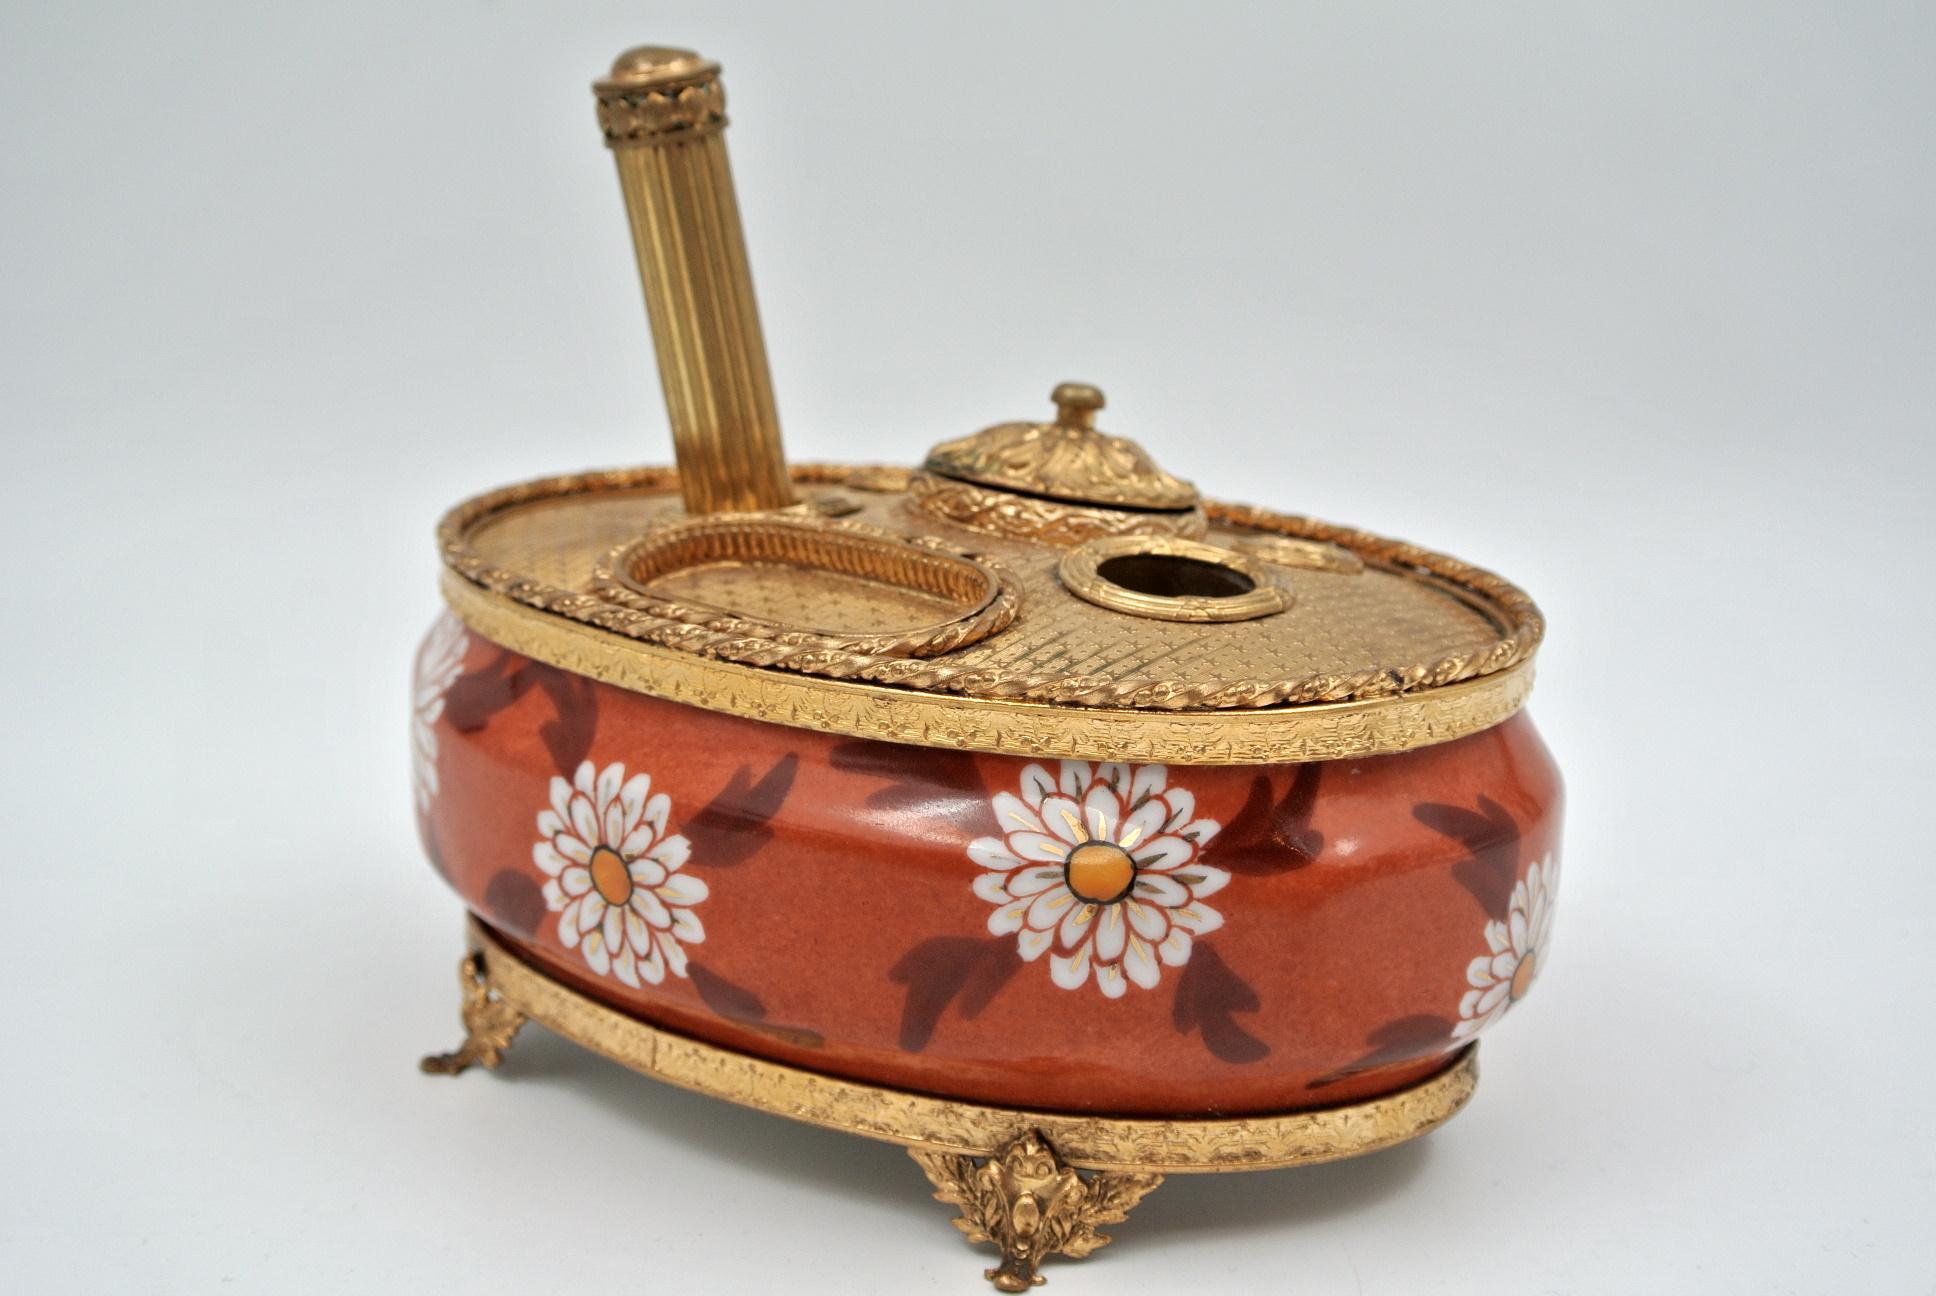 Inkwell in gilded brass and hand painted Limoges porcelain, 19th century, Napoleon III period.
Measures: H 9 cm, W 16 cm, D 11 cm.